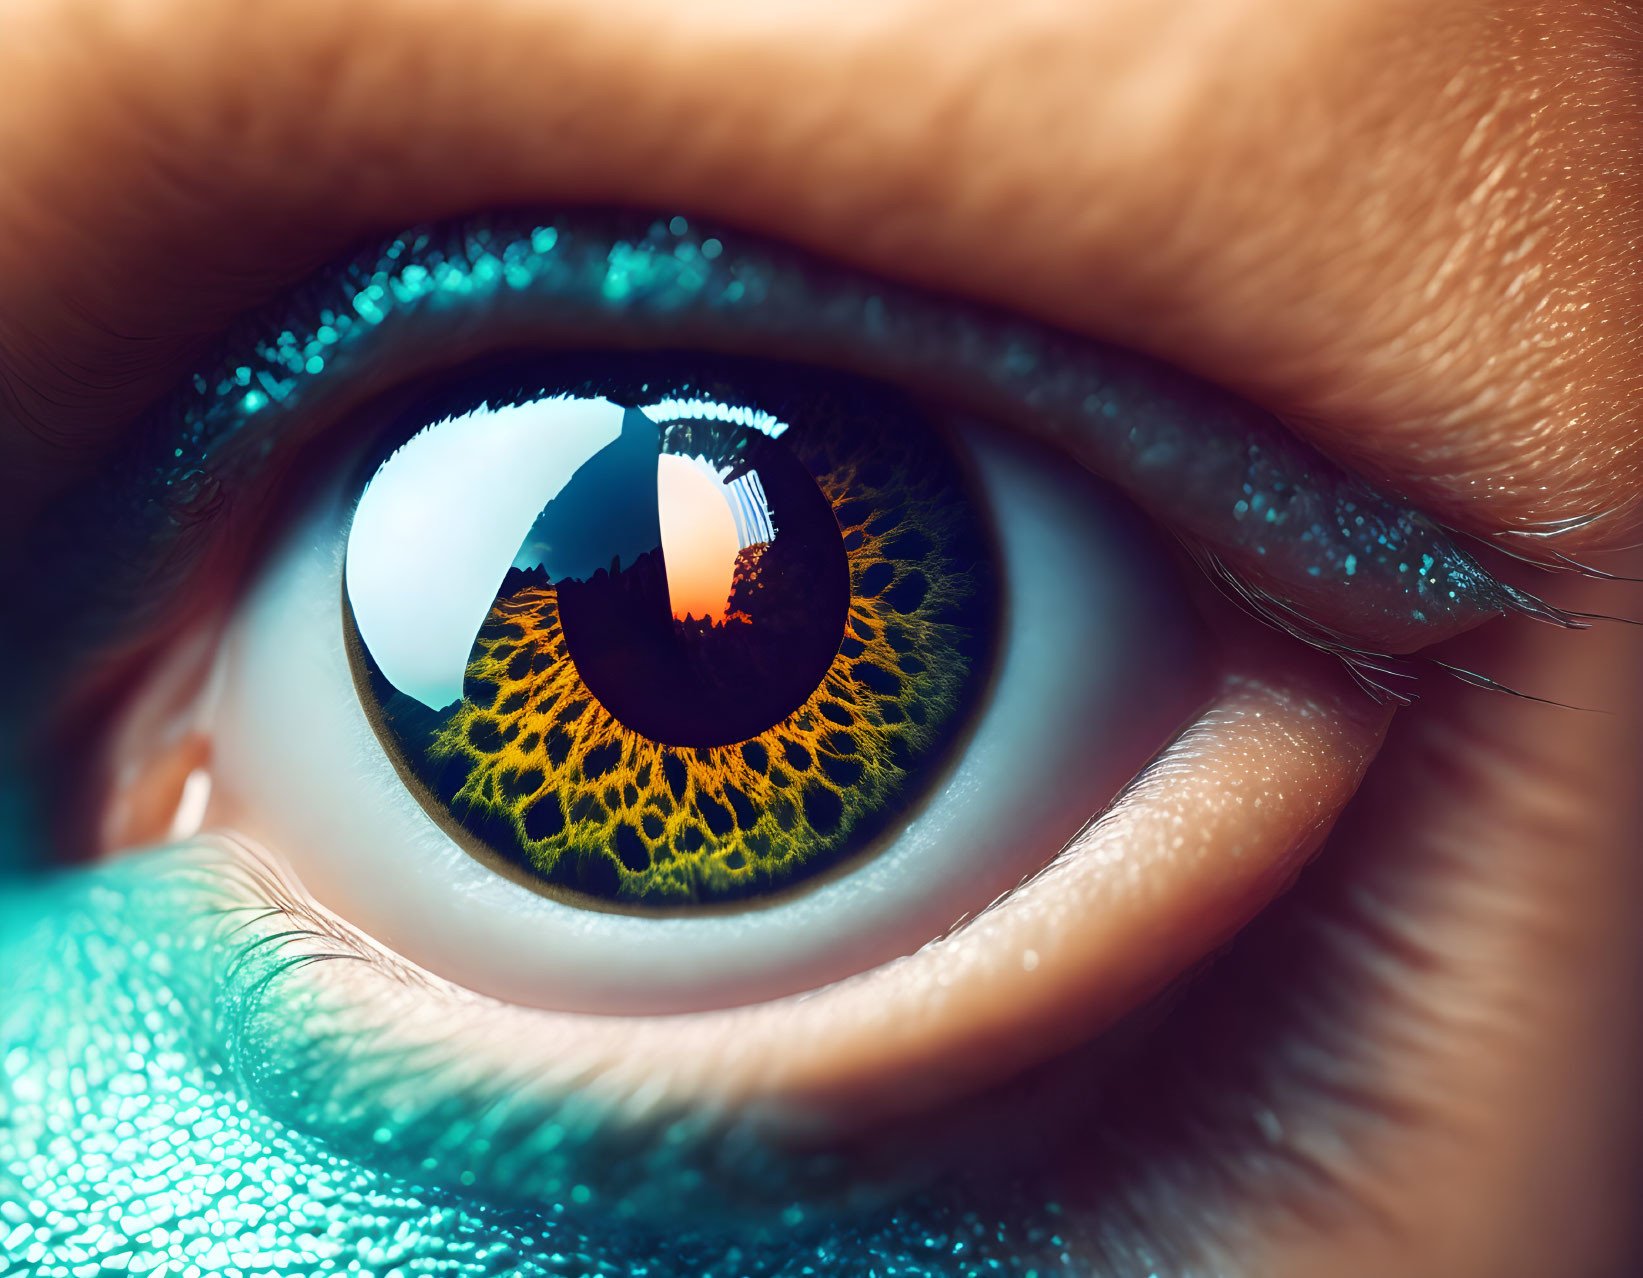 Detailed Close-Up of Human Eye with Green Iris and Cityscape Reflection